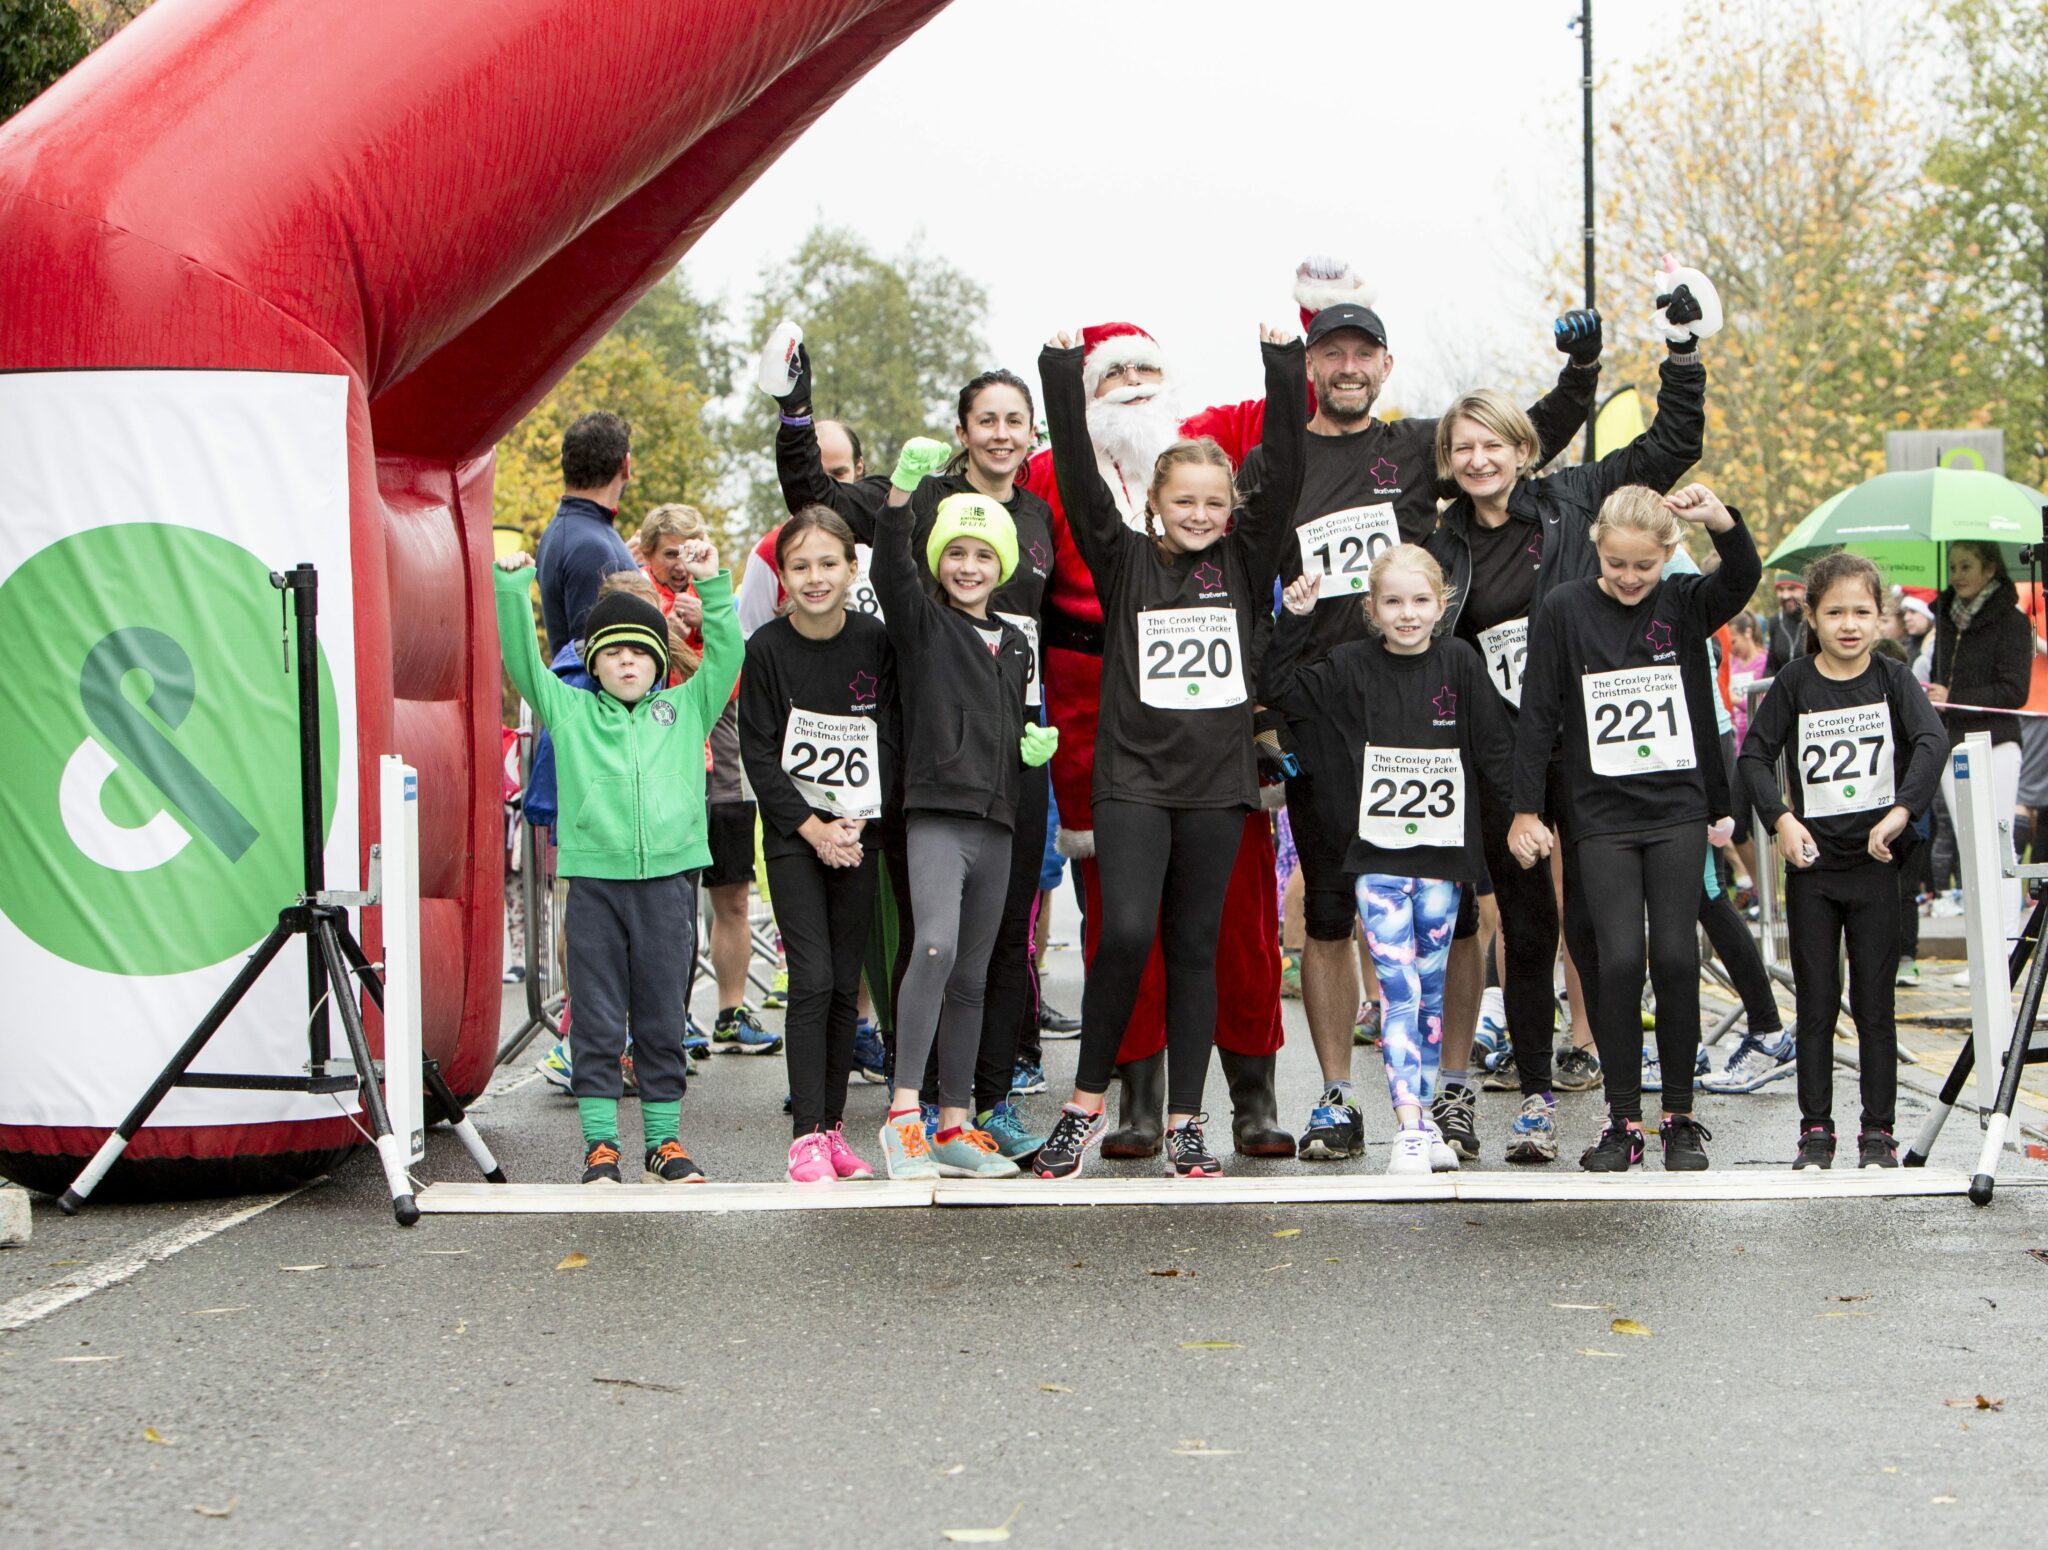 Croxley Park 10K Run | People cheering at finish line